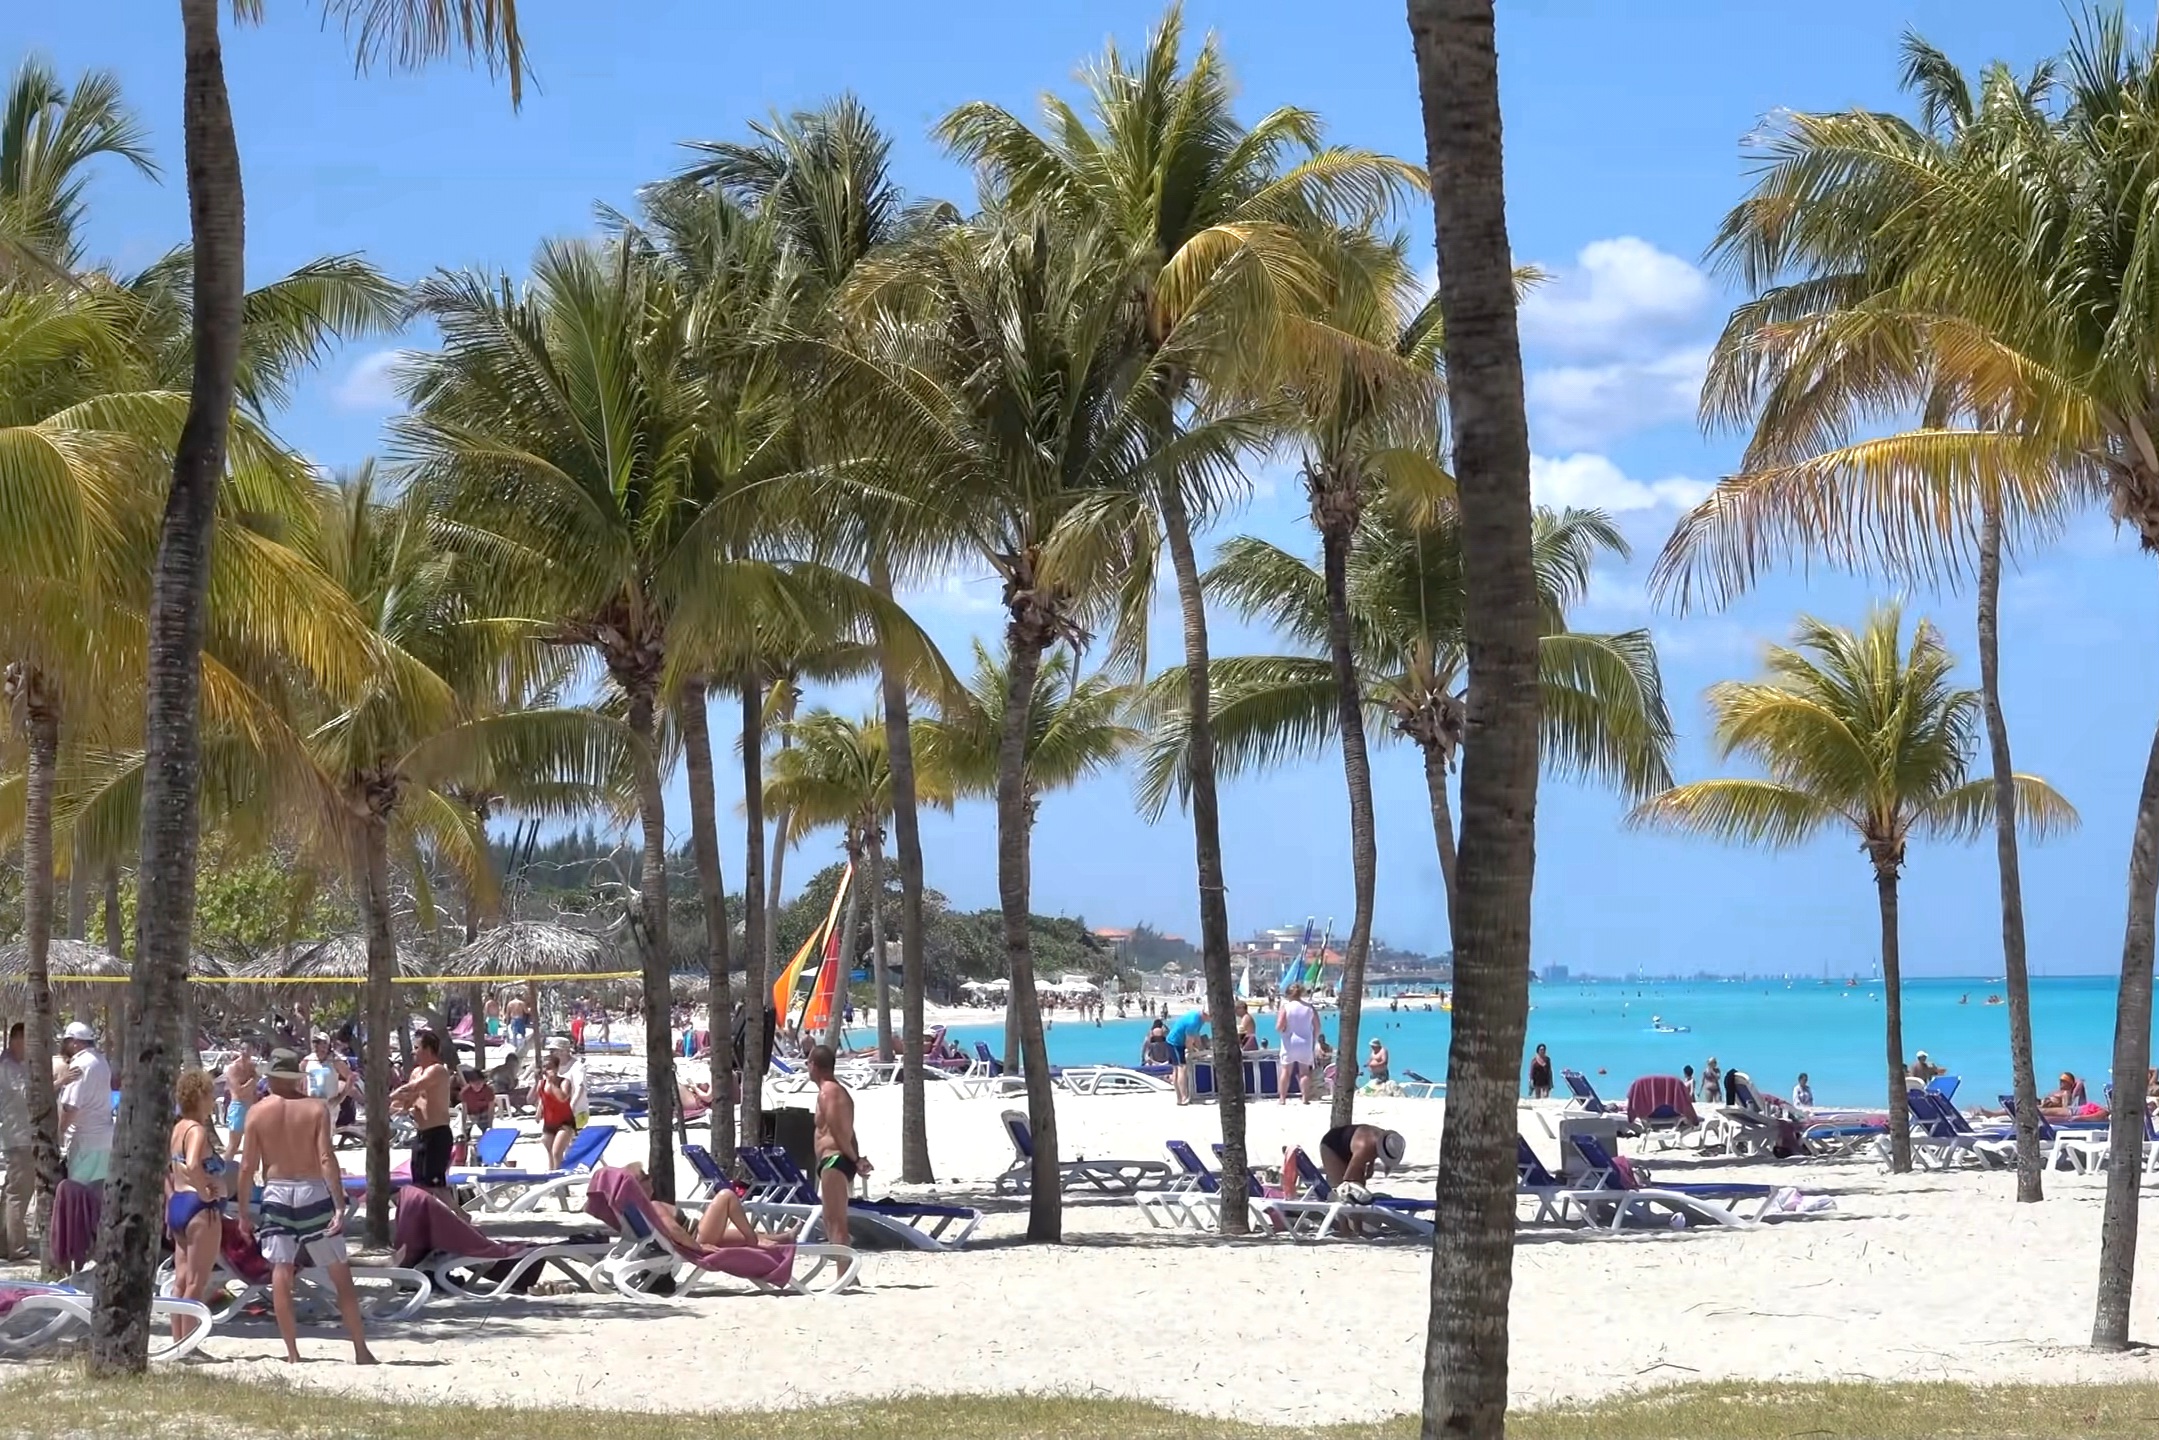 Varadero is now the 10th best beach in the world, according to TripAdvisor